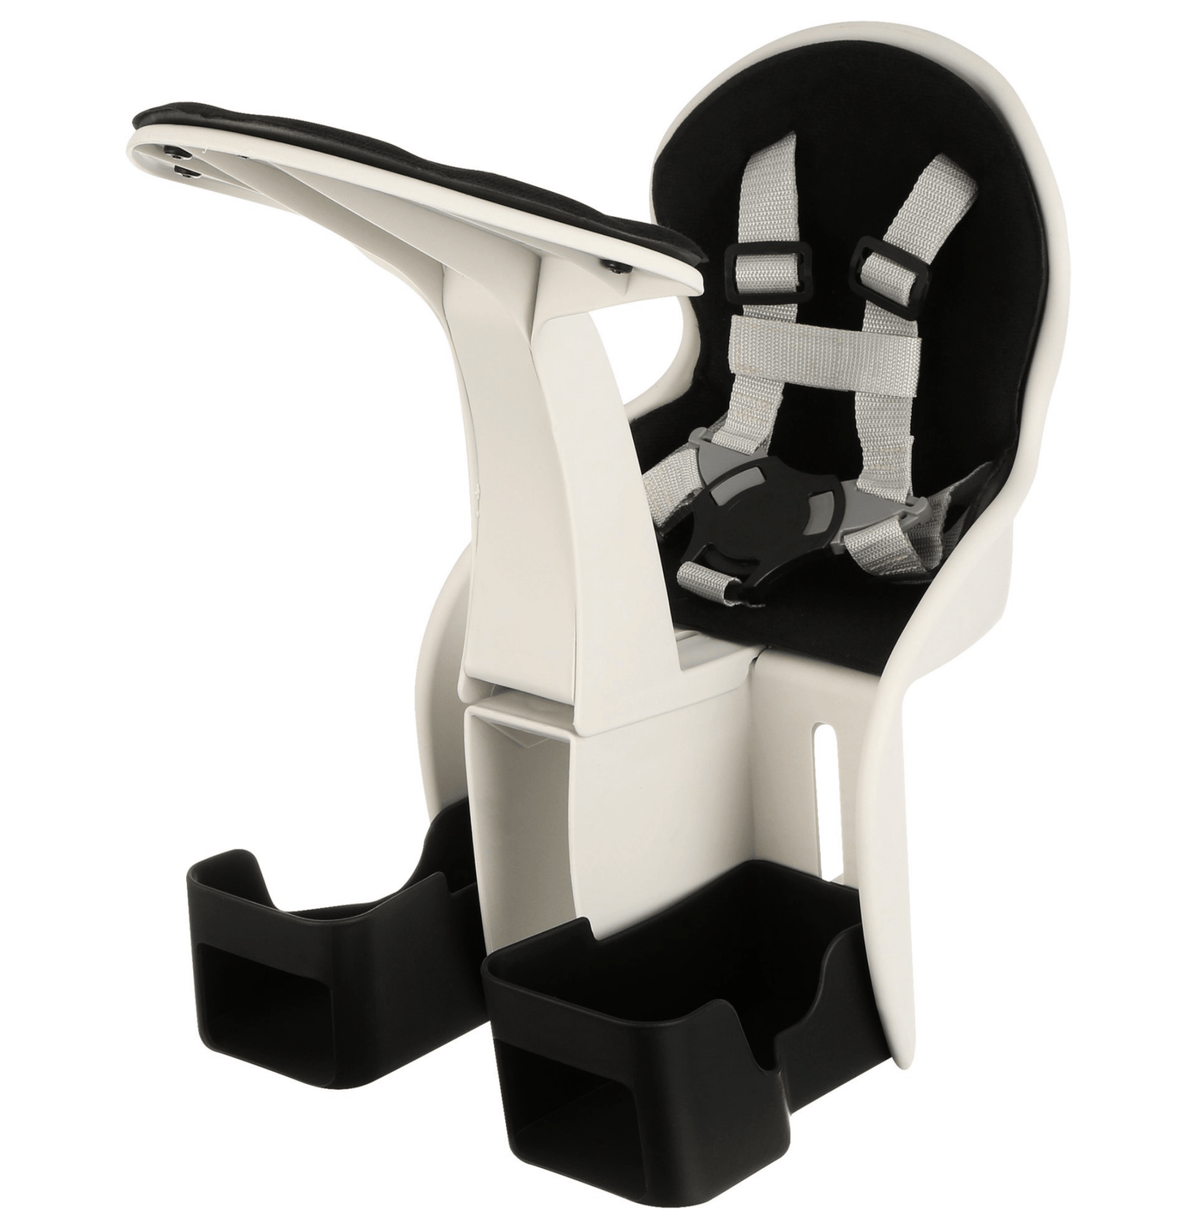 Bike Shop Center Mounted Child Seat | Child Bike Seat for Ages 8 Months - 3 Years